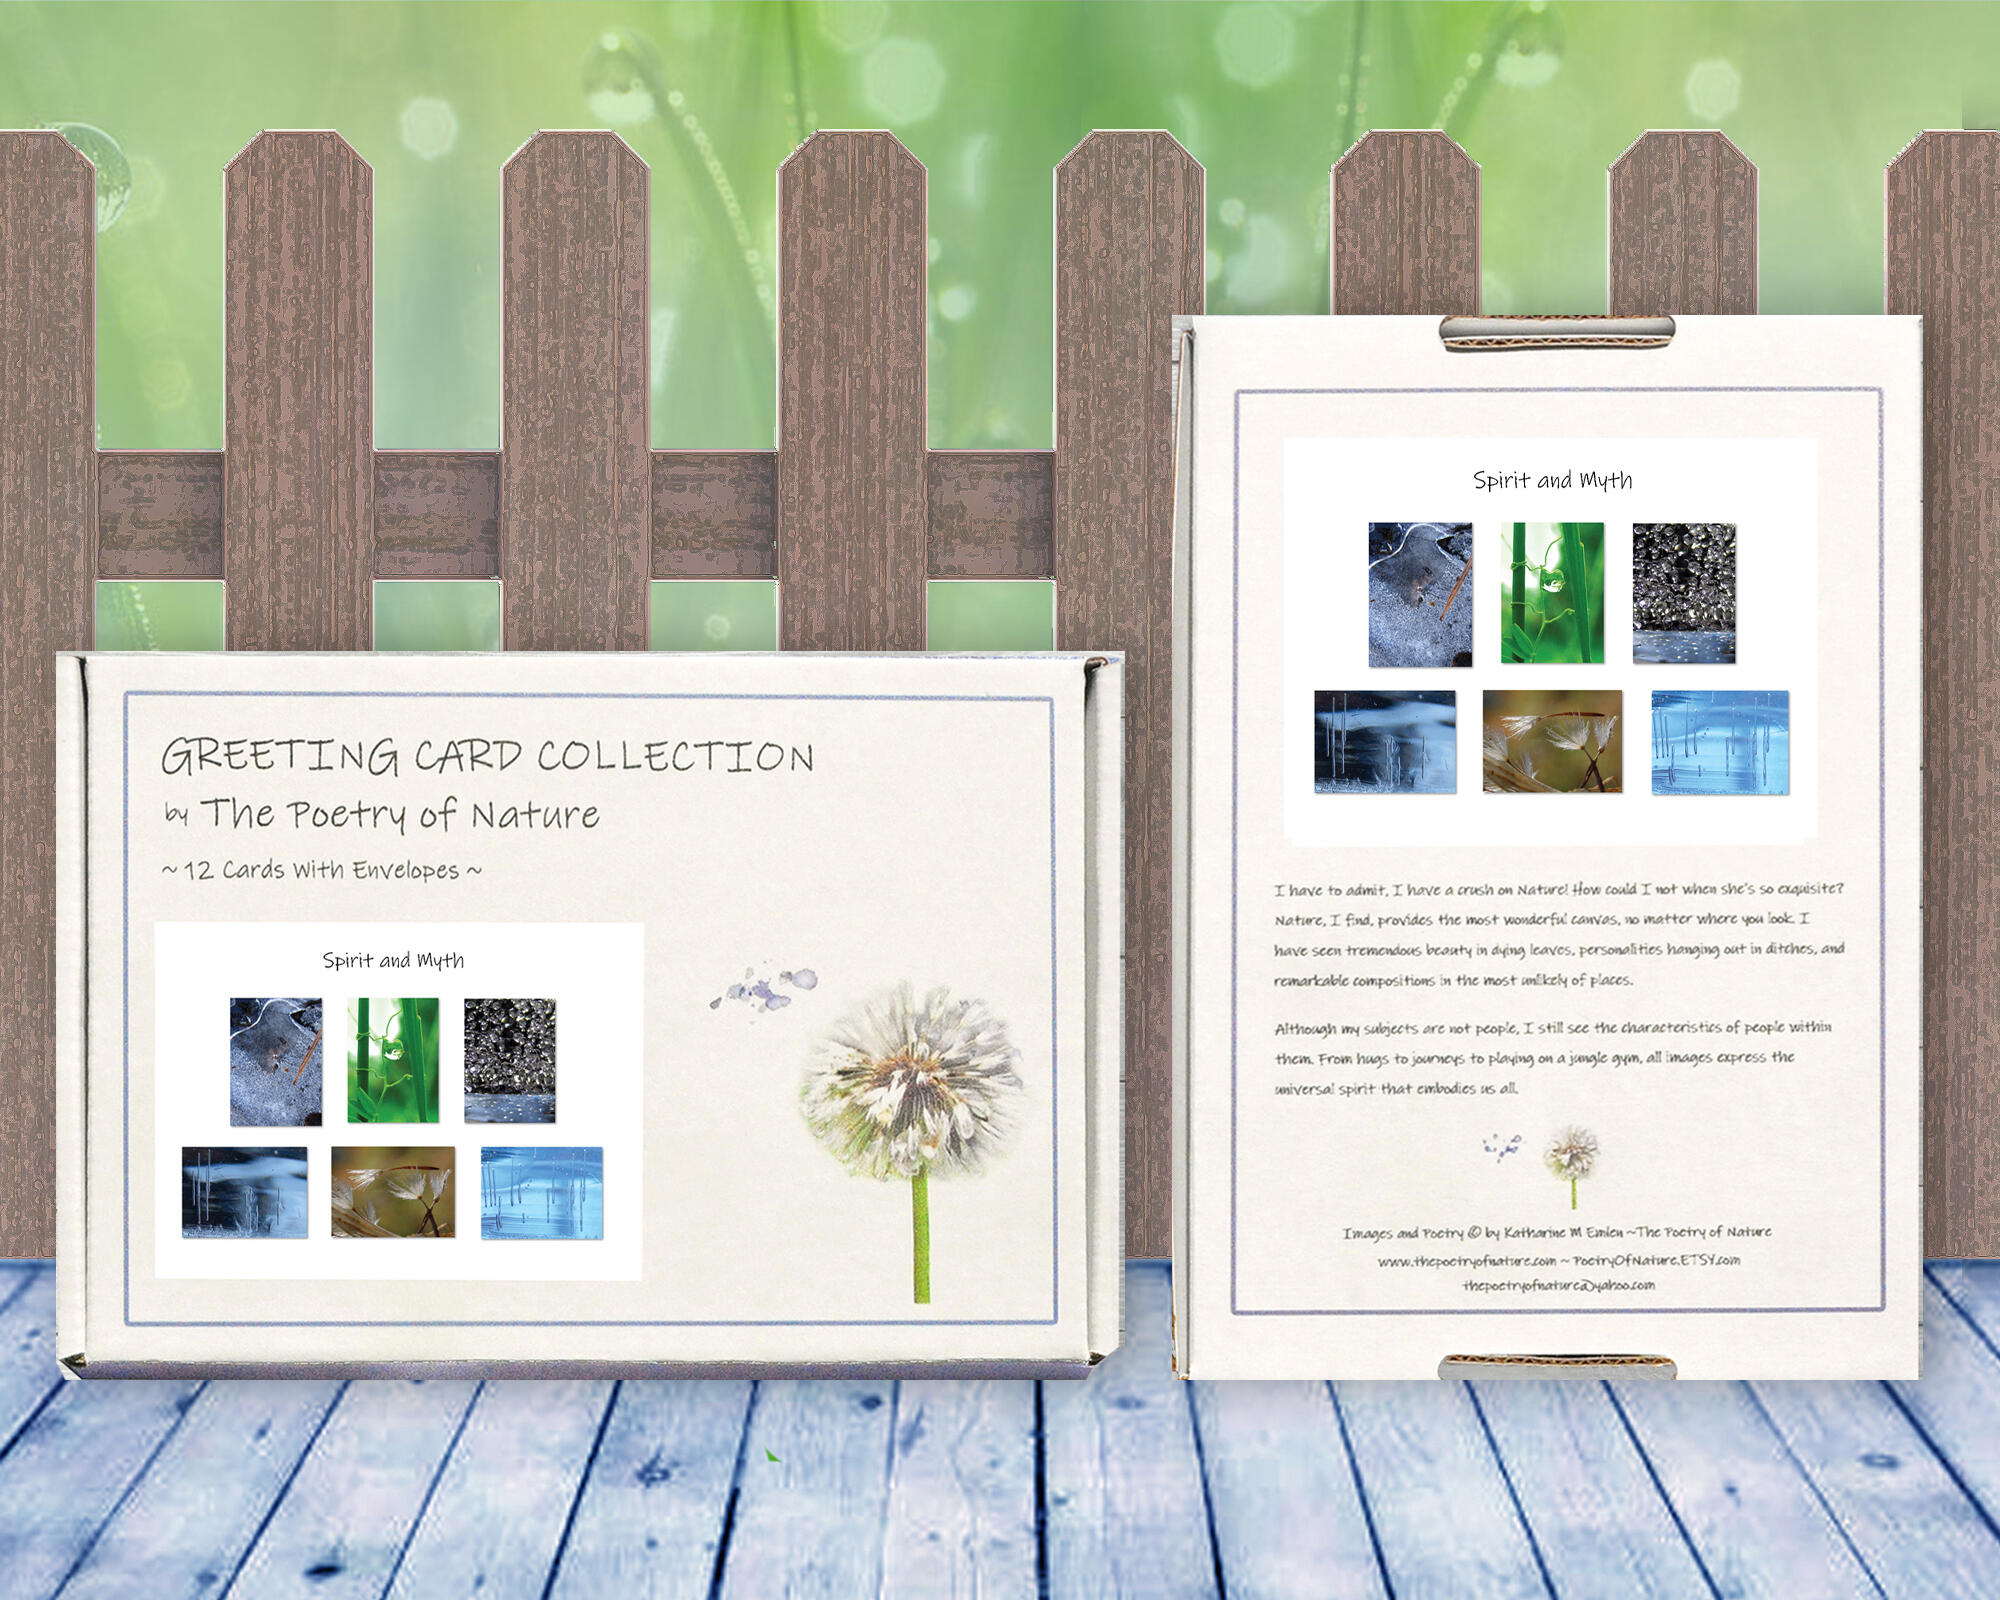 Spirit and Myth Greeting Card Collection by The Poetry of Nature